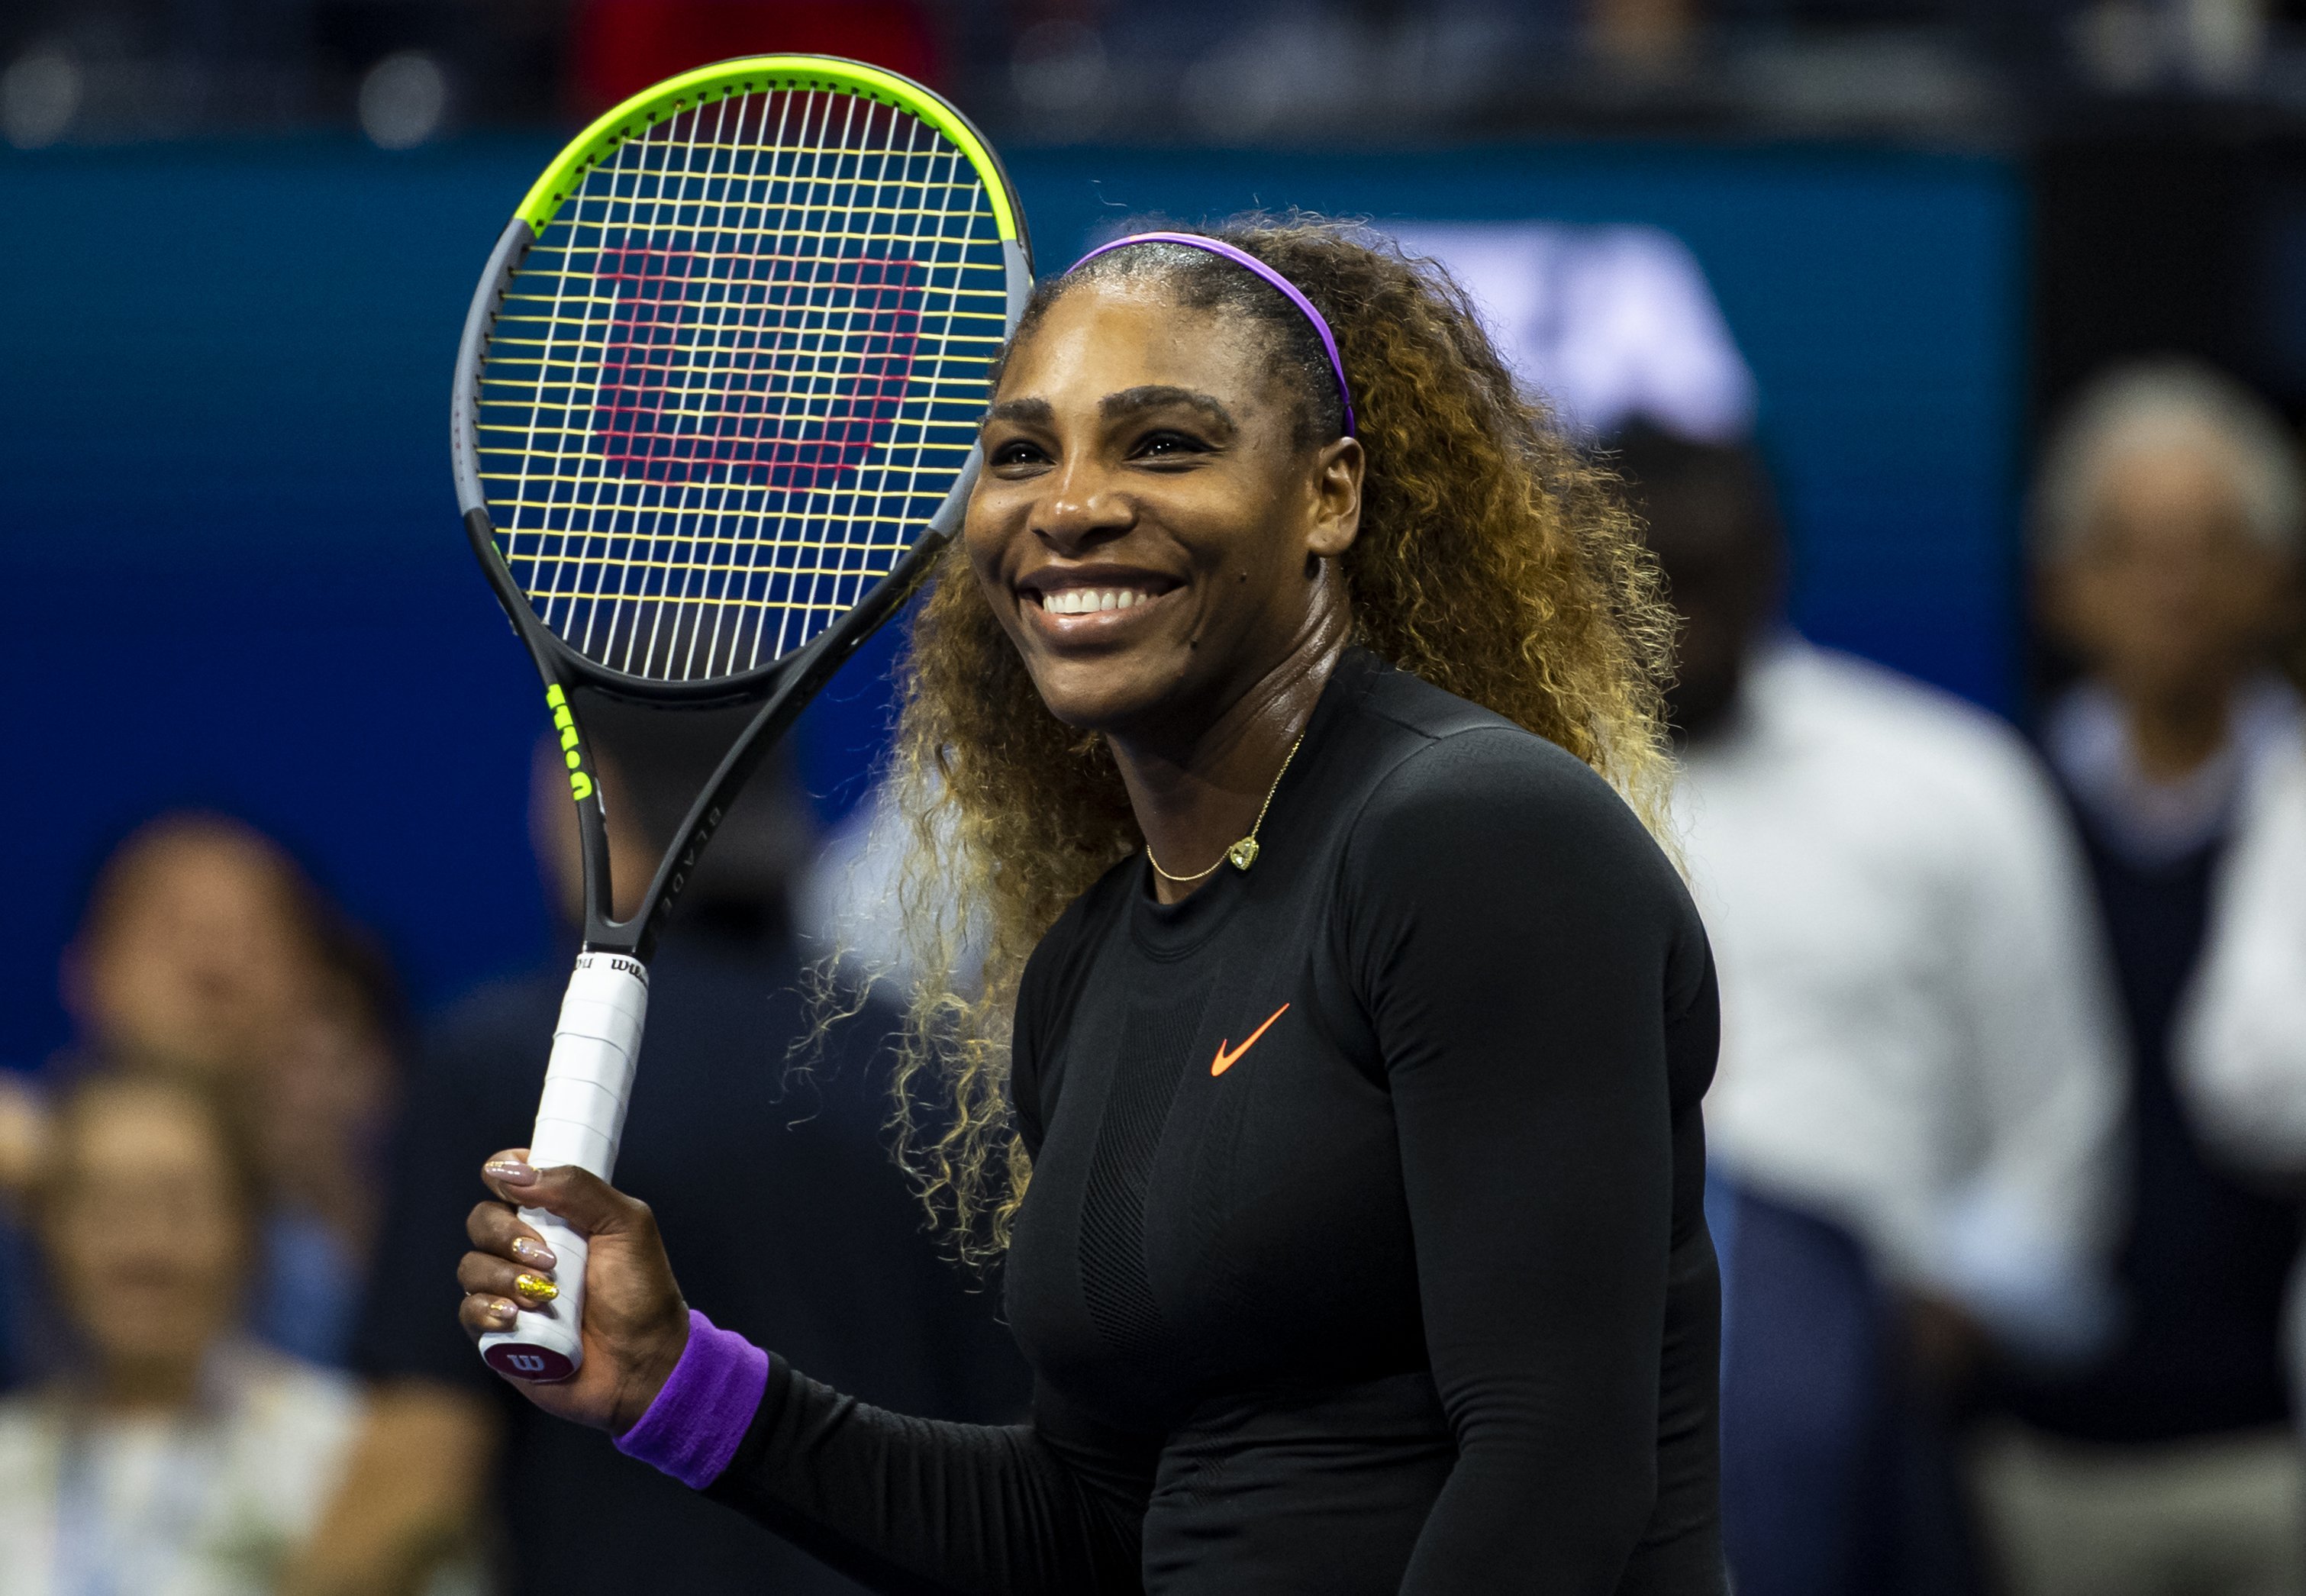 Serena Williams at the USTA Billie Jean King National Tennis Center on September 05, 2019 in New York City. | Source: Getty Images